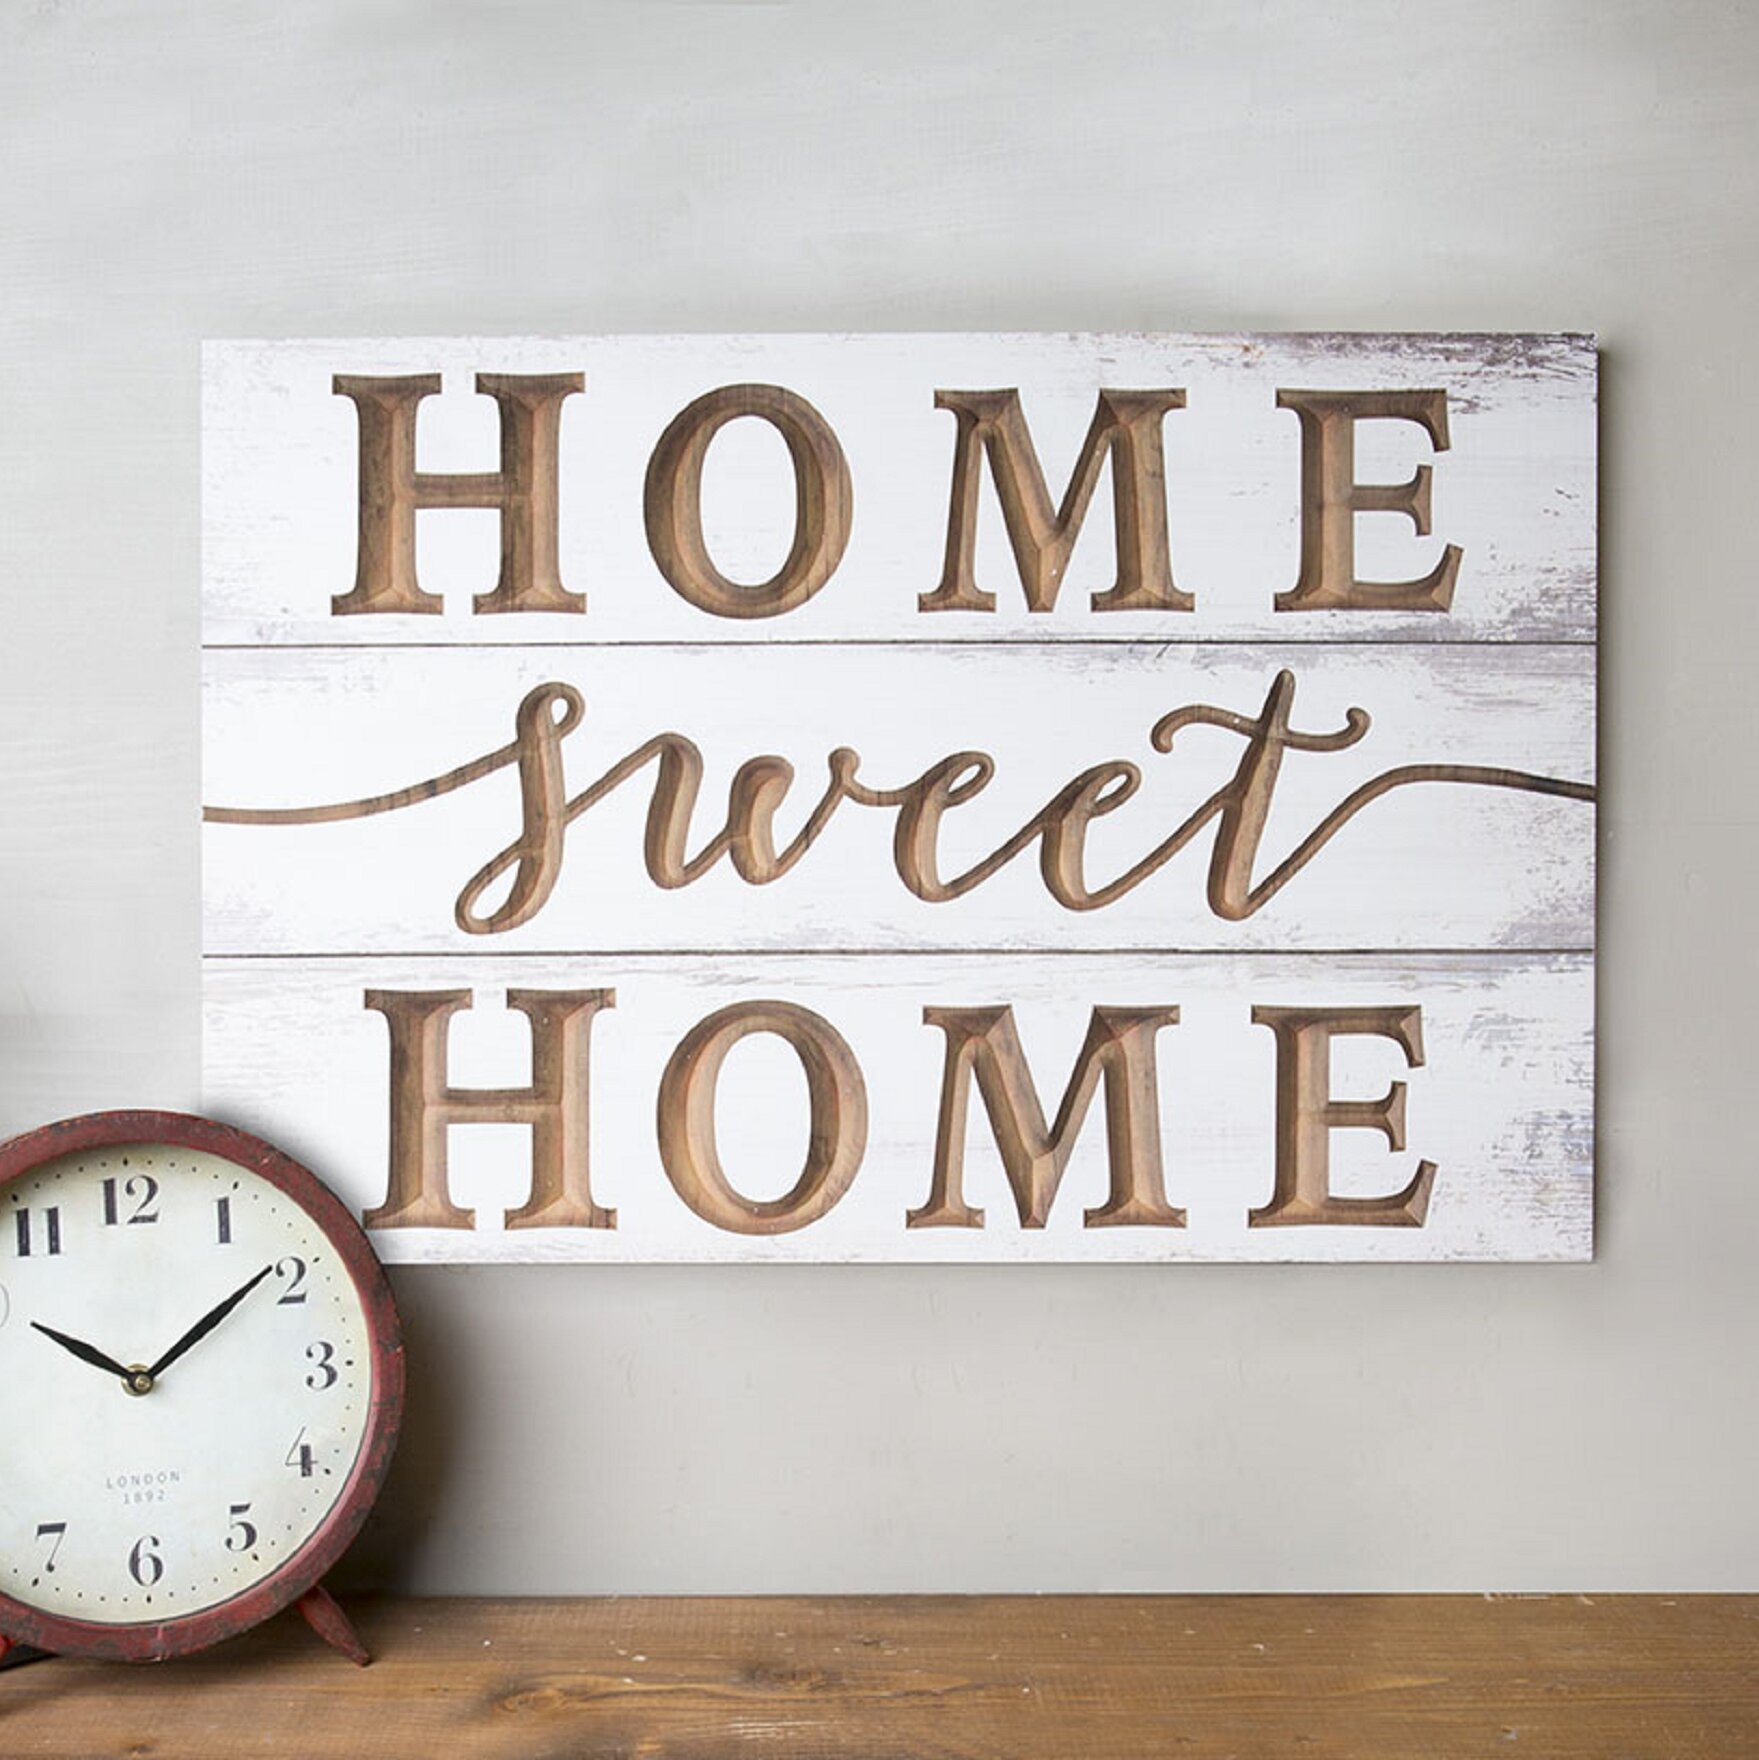 Beautiful 10 Home Sweet Home Accessories | Home Decorations Ideas